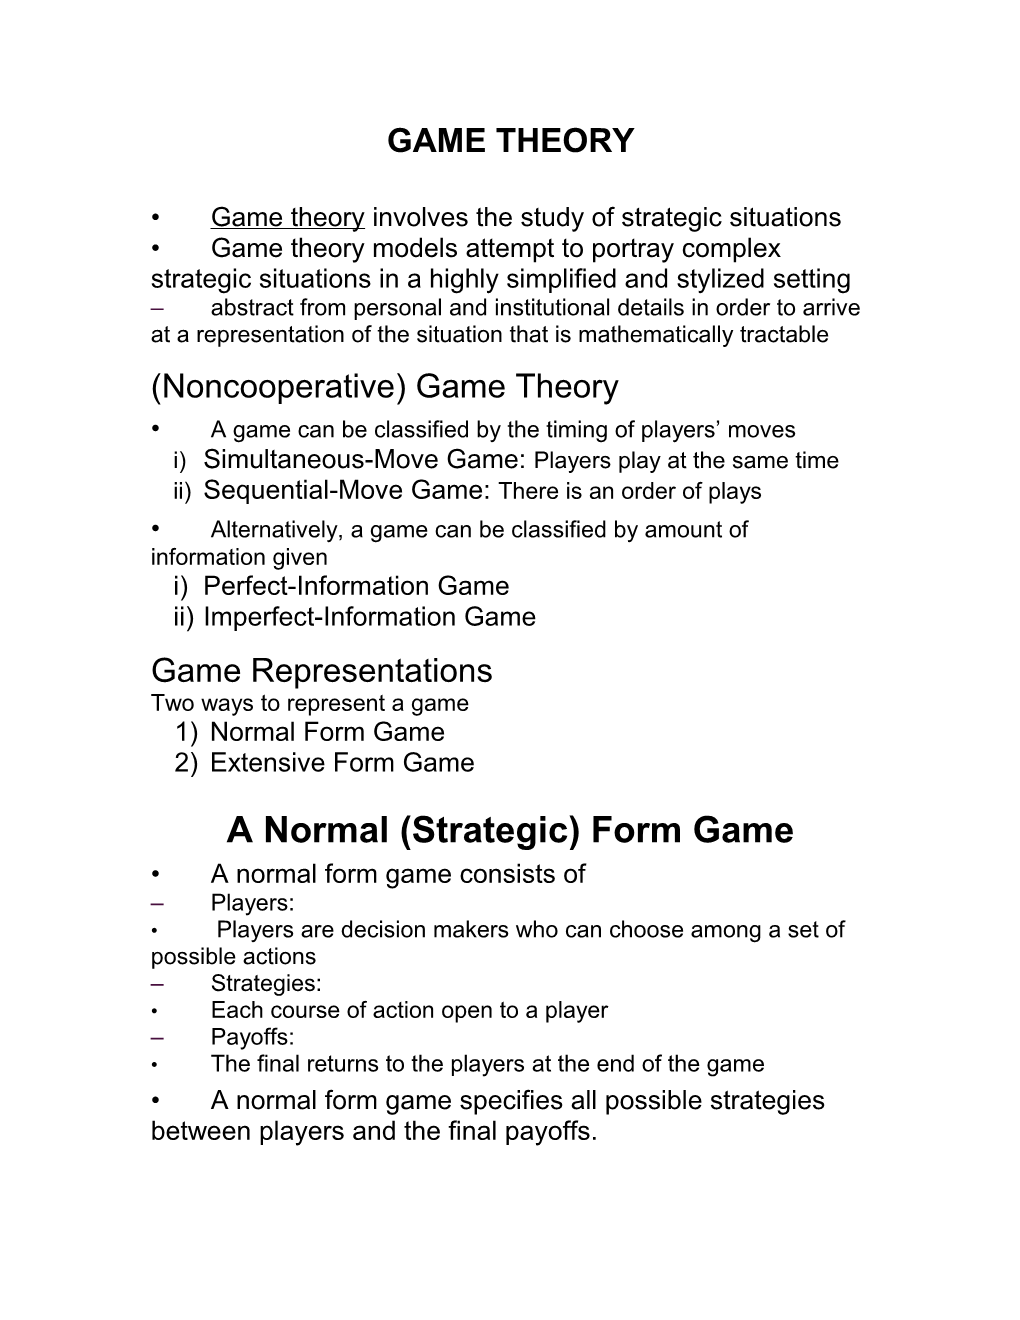 Game Theory Involves the Study of Strategic Situations